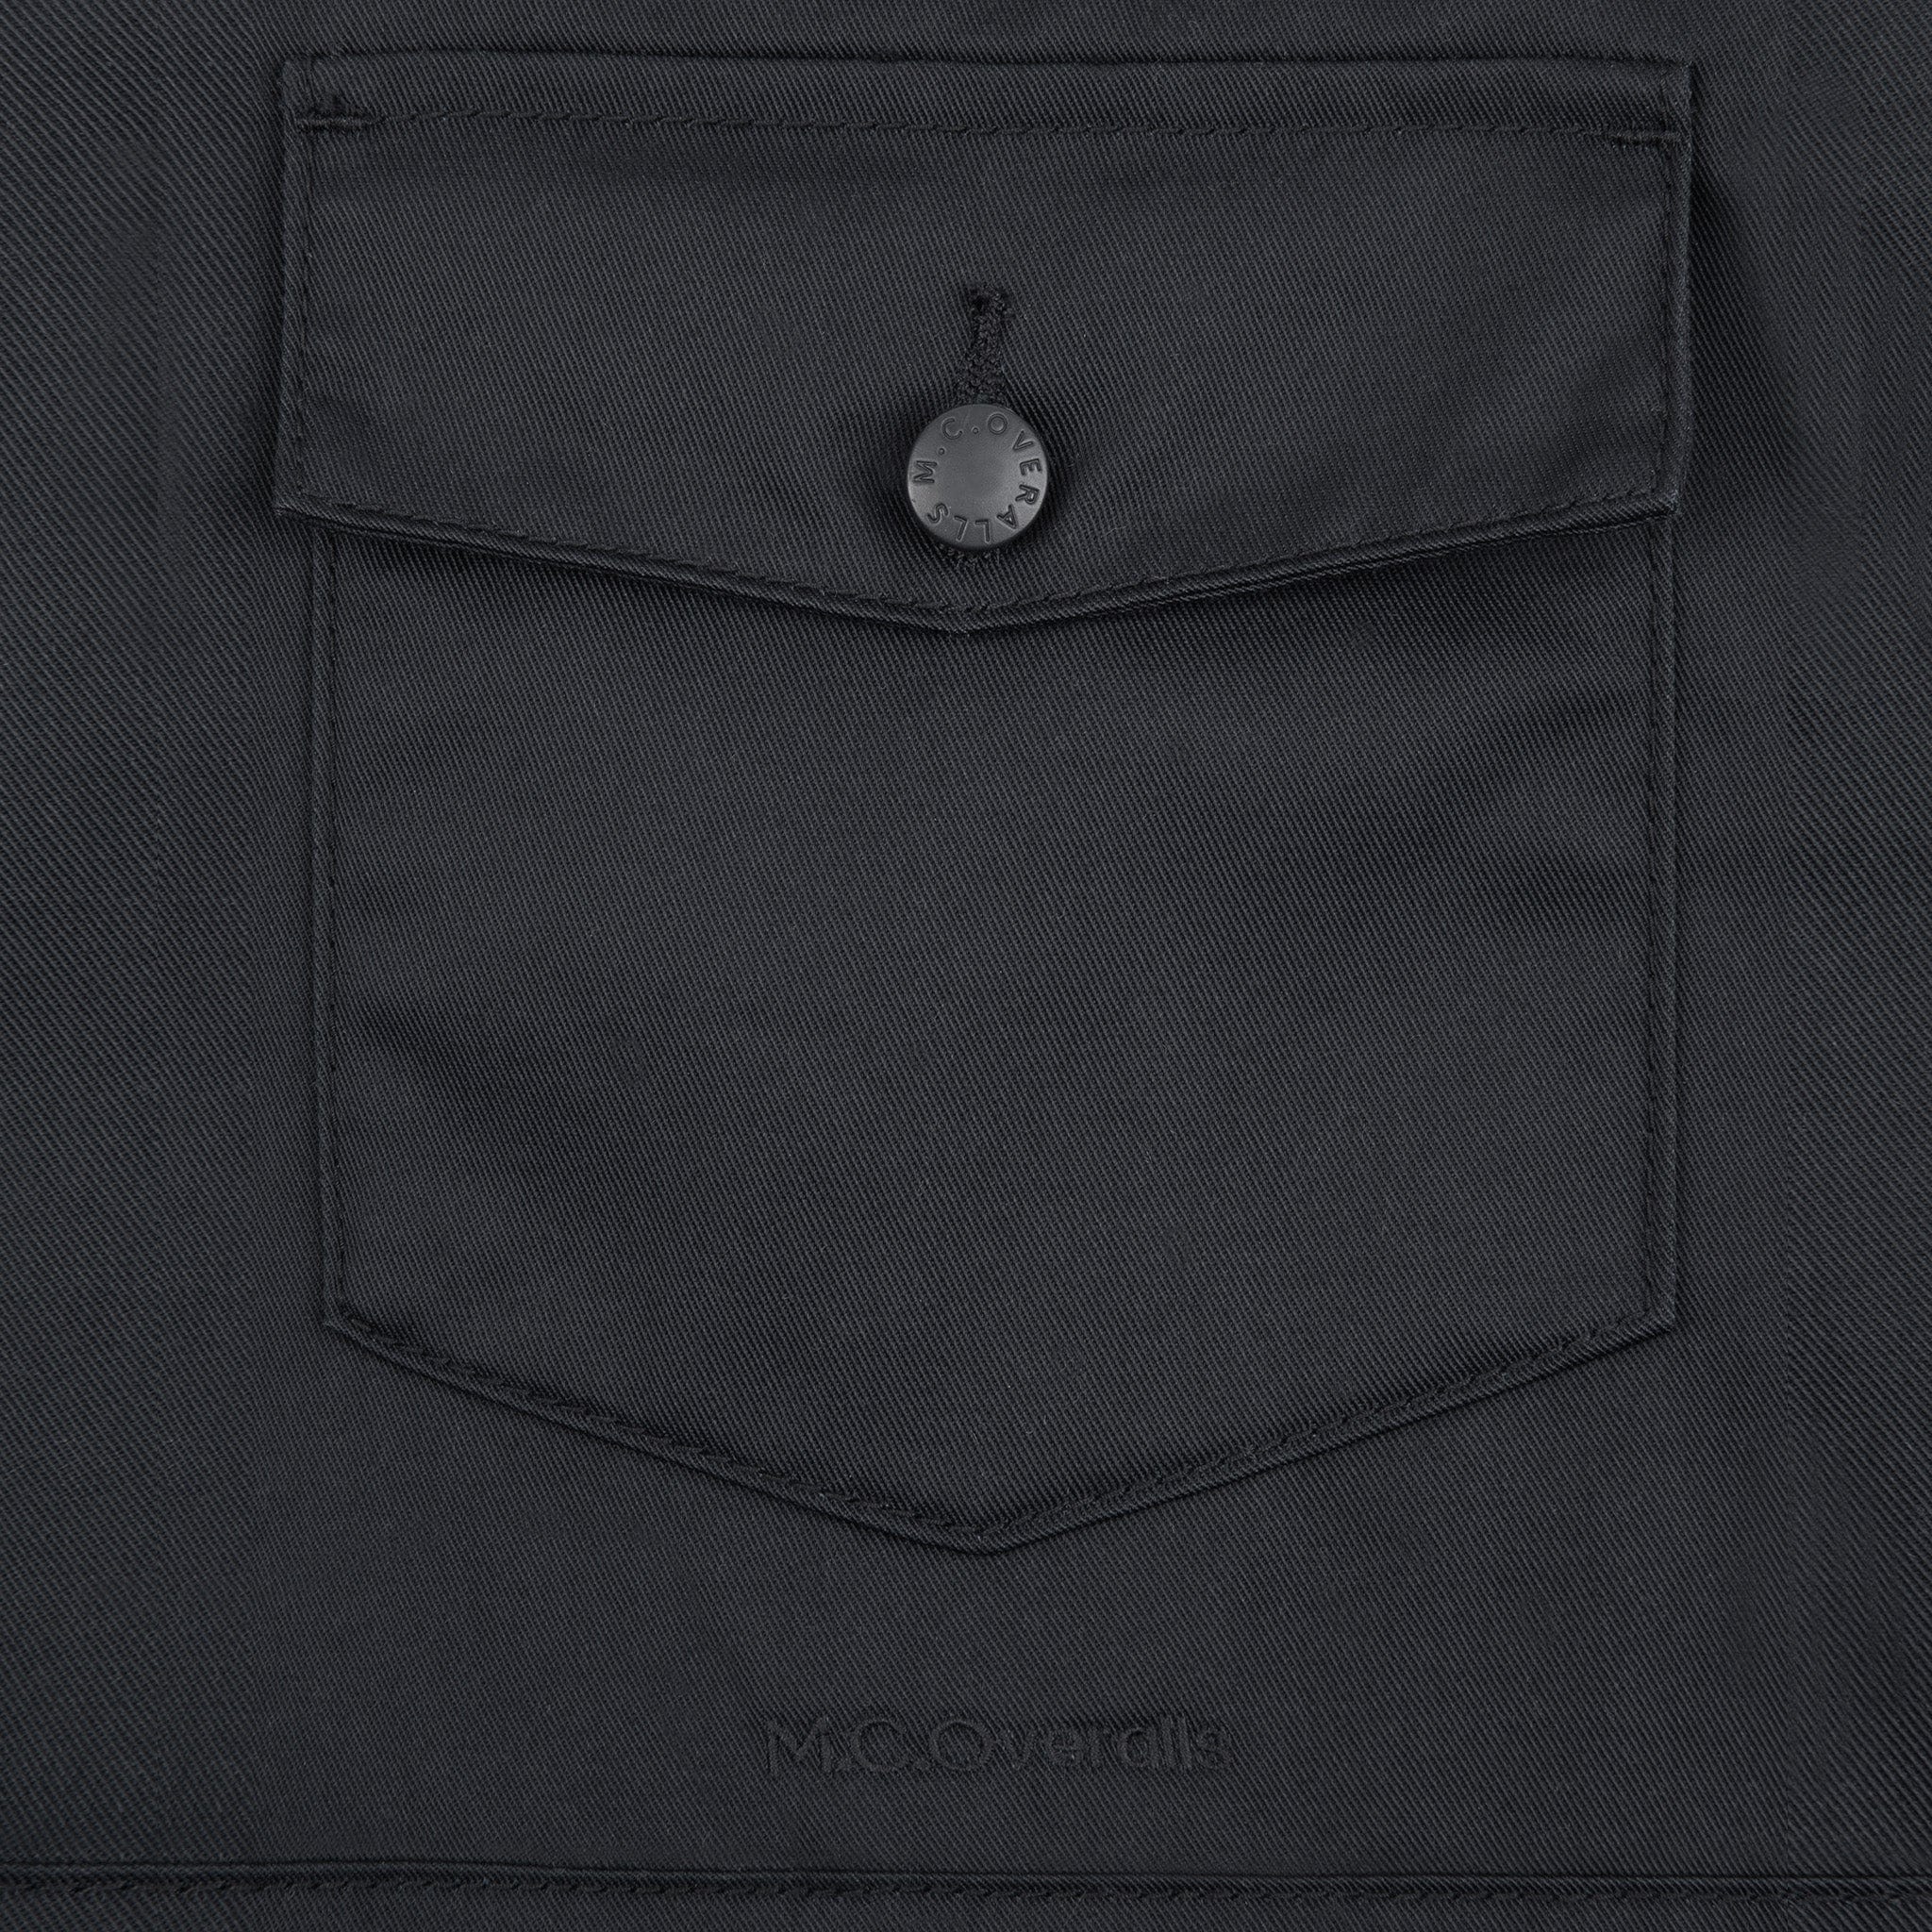 M.C.O's Logo Situated Below the Pocket of Black Polycotton Dungarees.